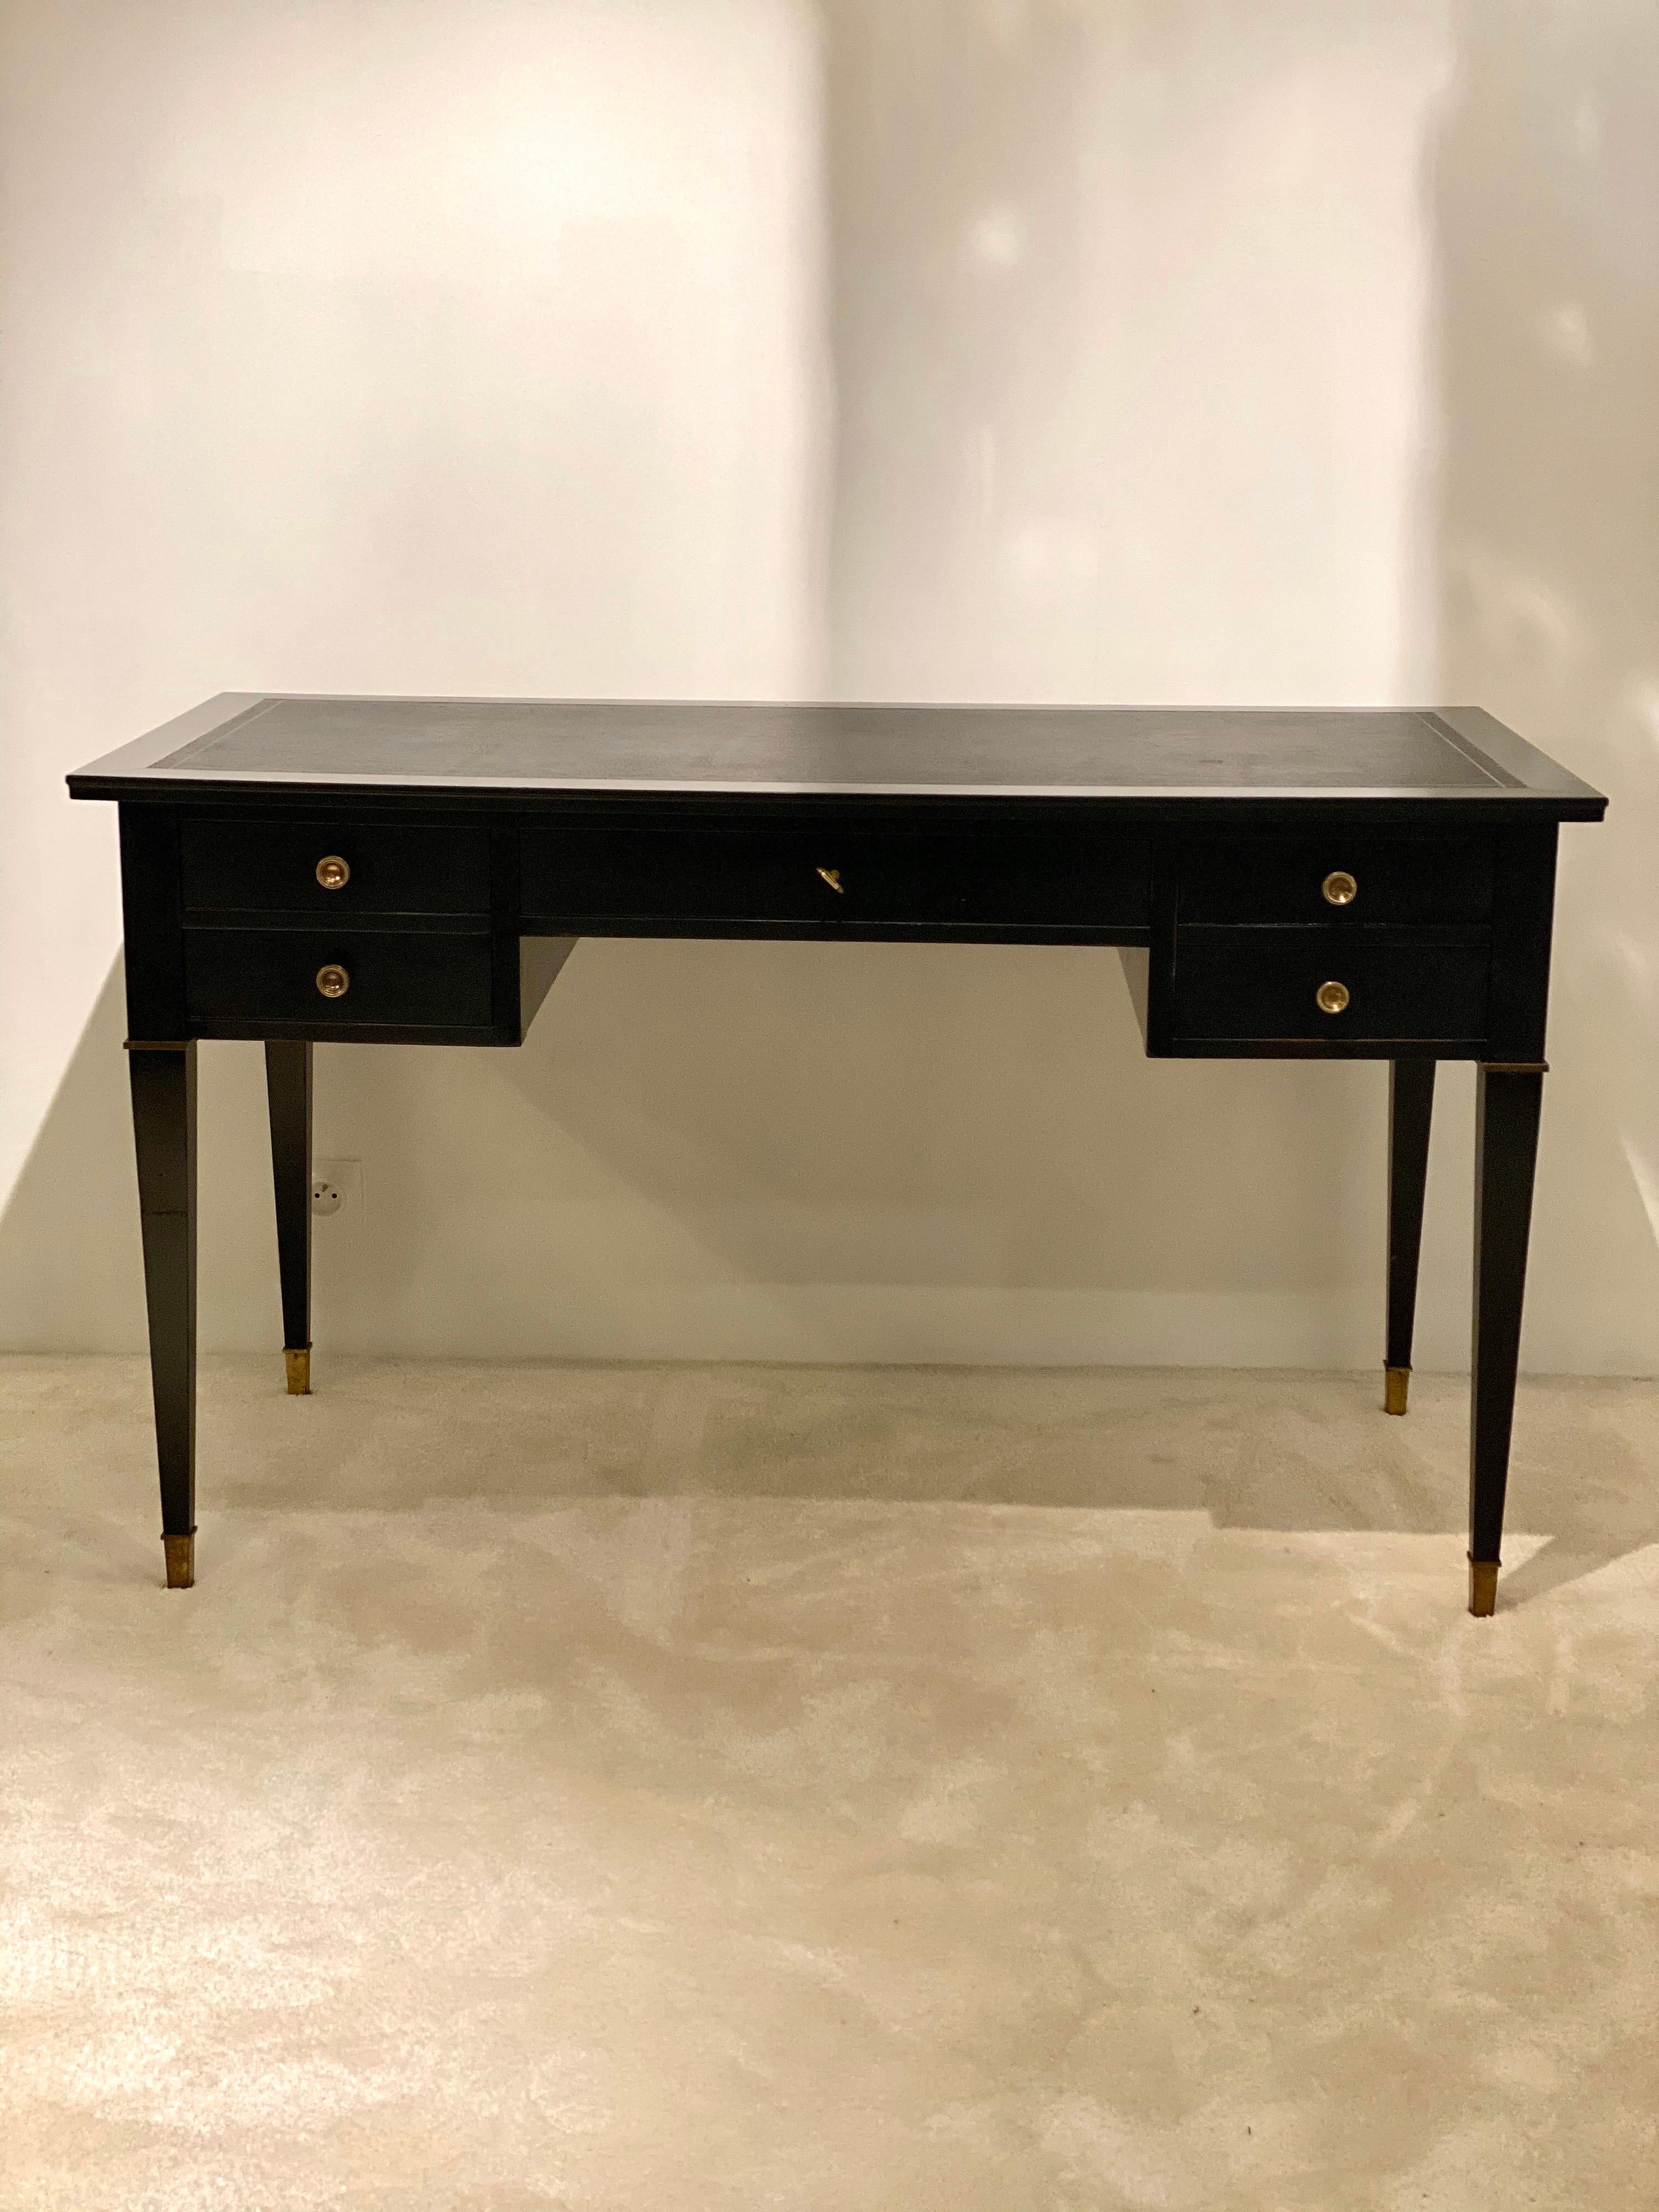 Jacques Adnet was a French designer who was well known for his leather furniture and elegant lines.
This black wood desk has a modern vibe, beautiful volume, top covered in black leather and brass buttons to give contrast: a touch of luxury for any